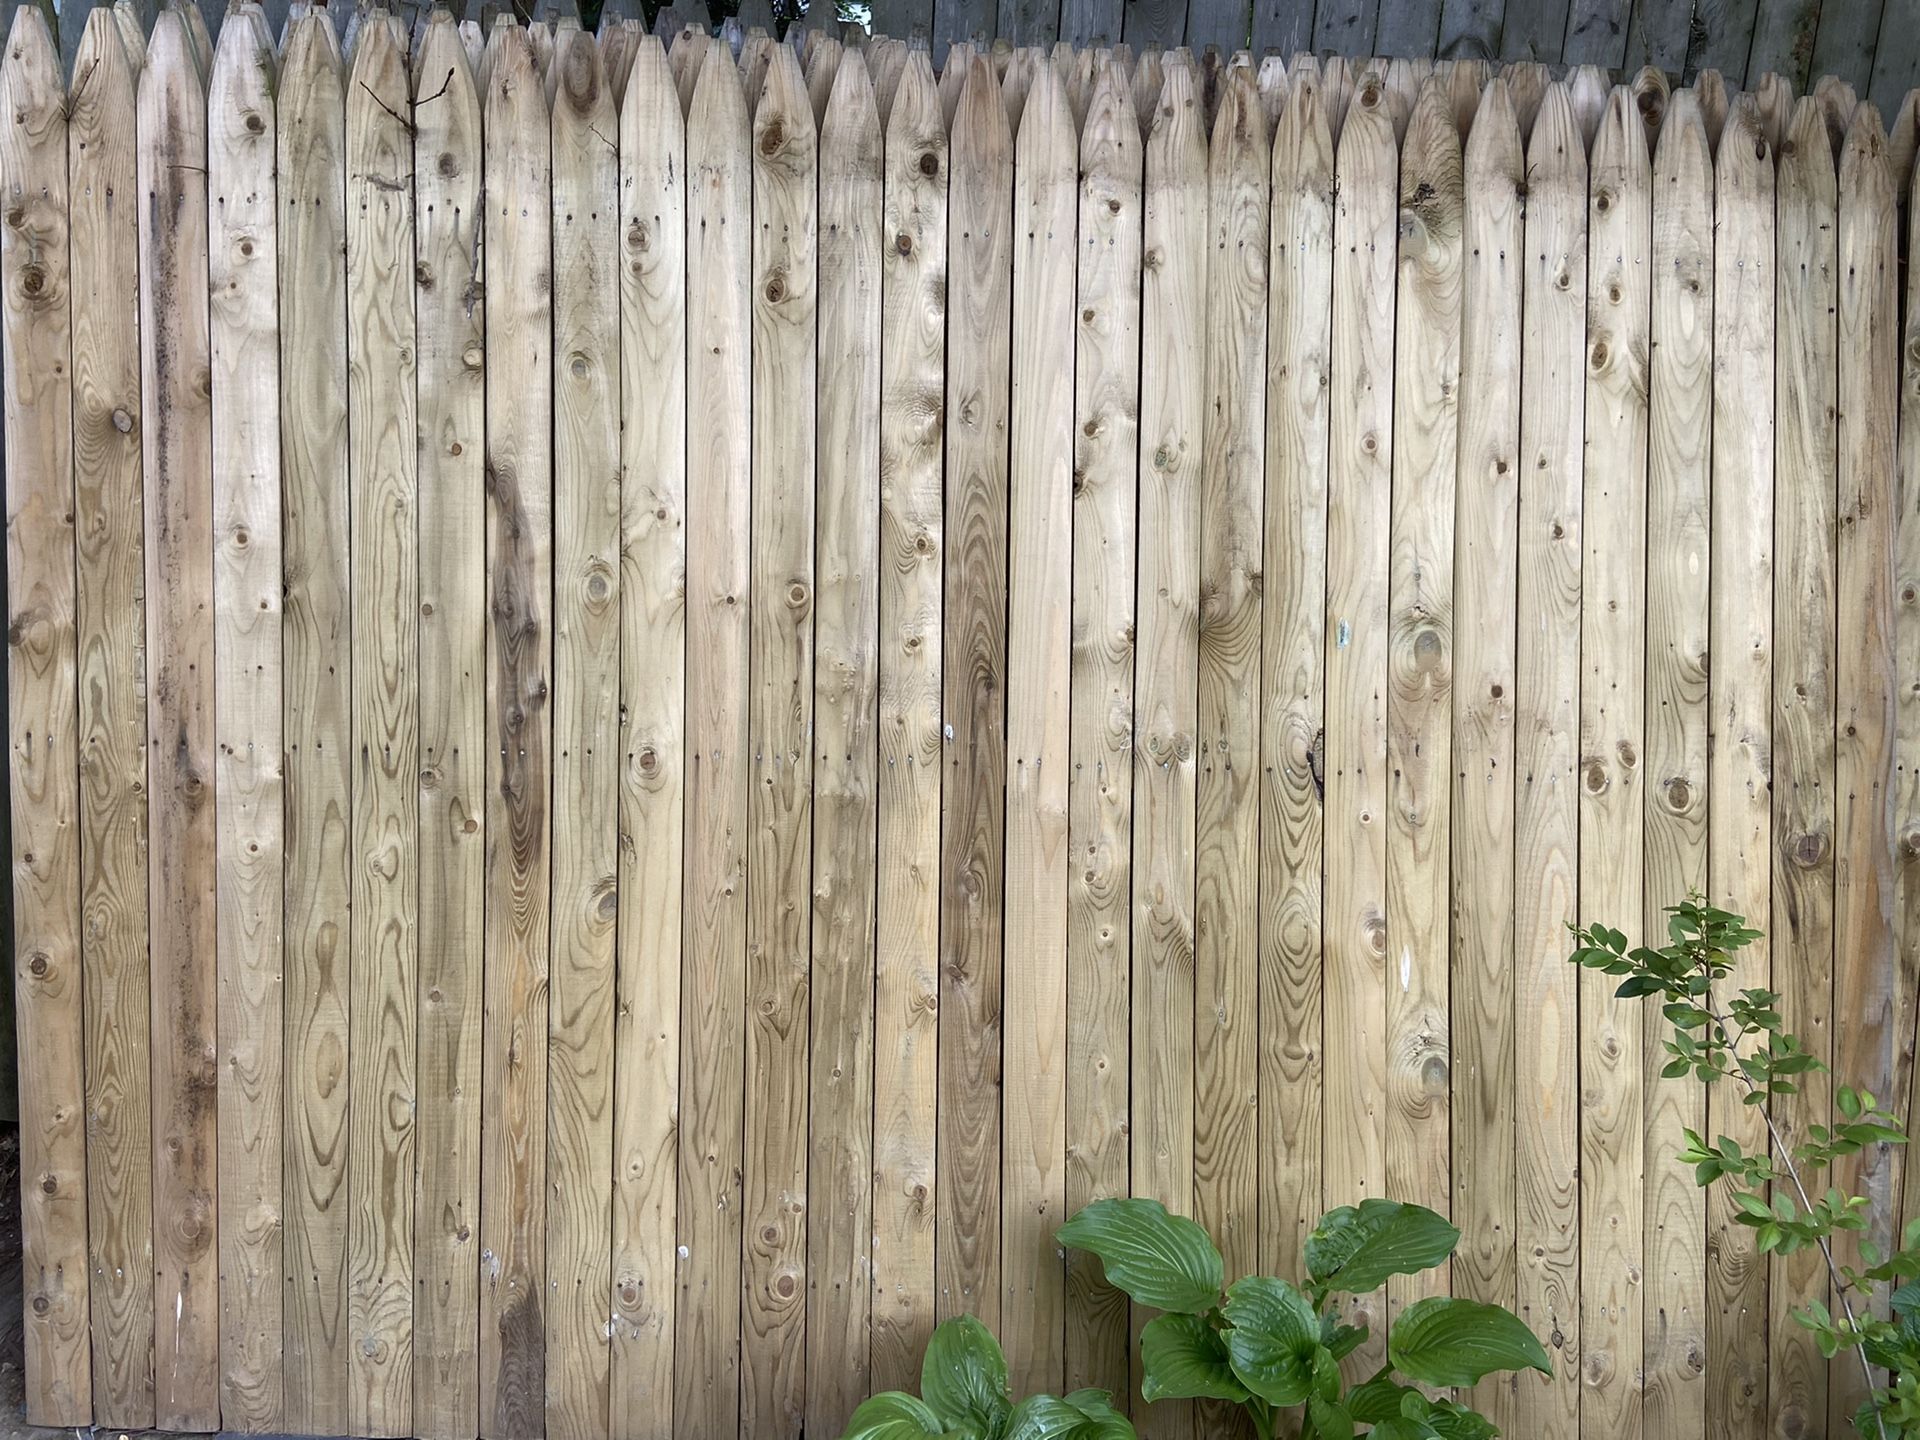 Pressure-treated 6’x8’ picket fencing